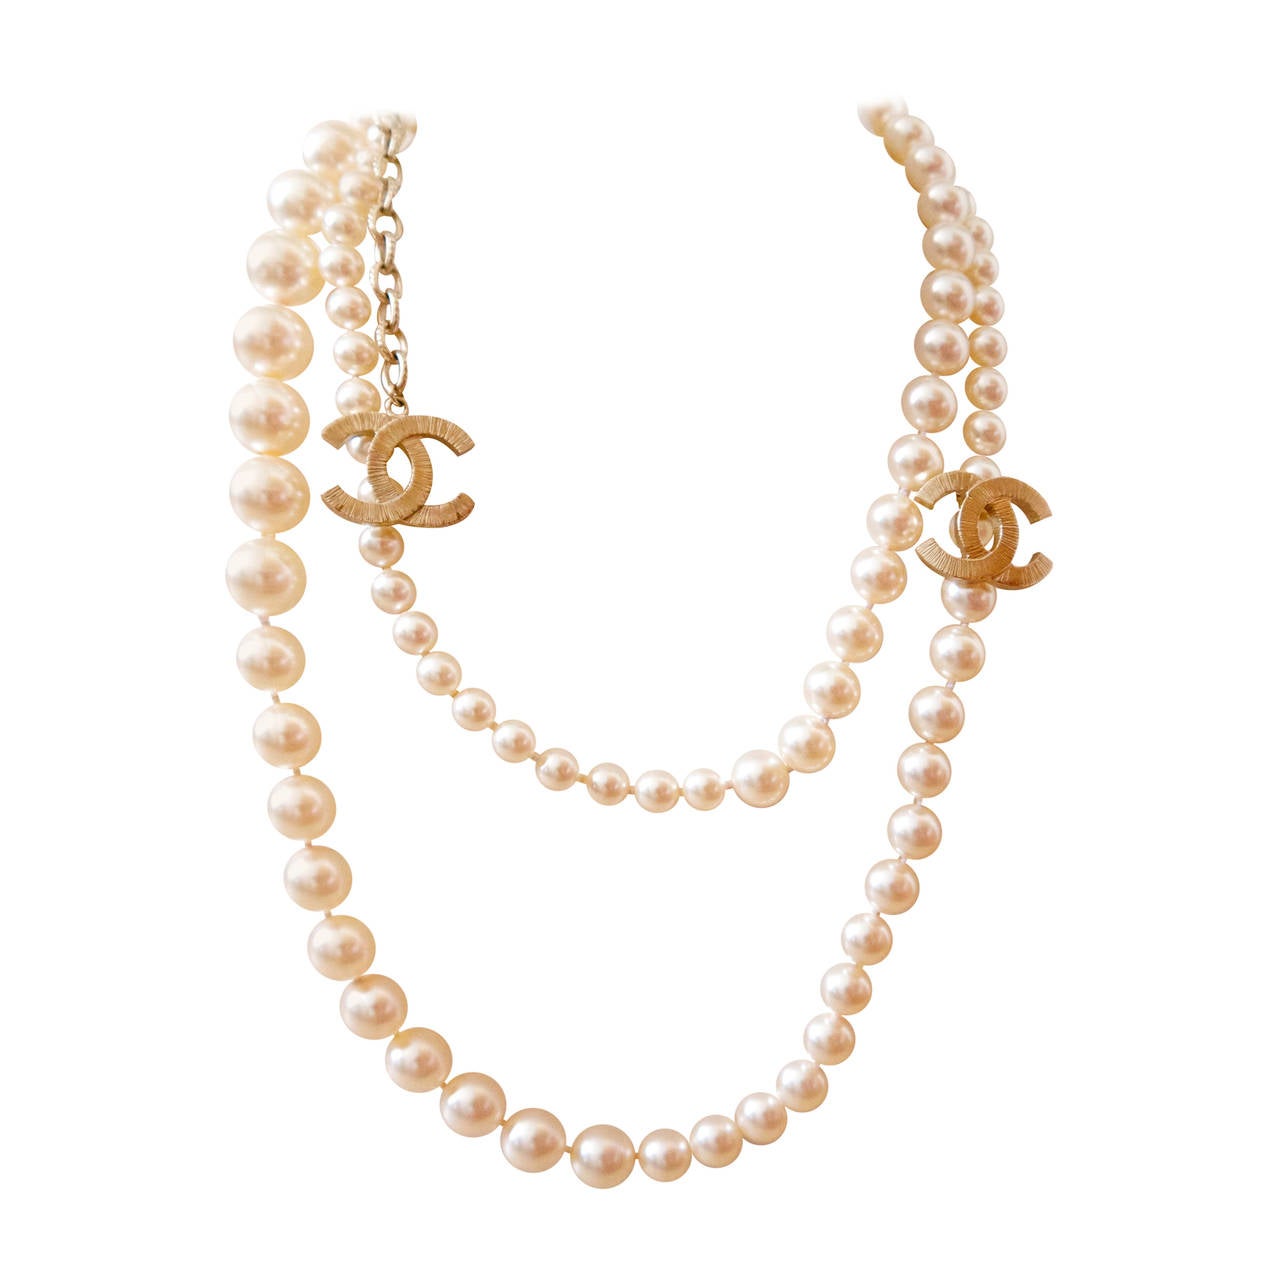 New Chanel Pearl Necklace